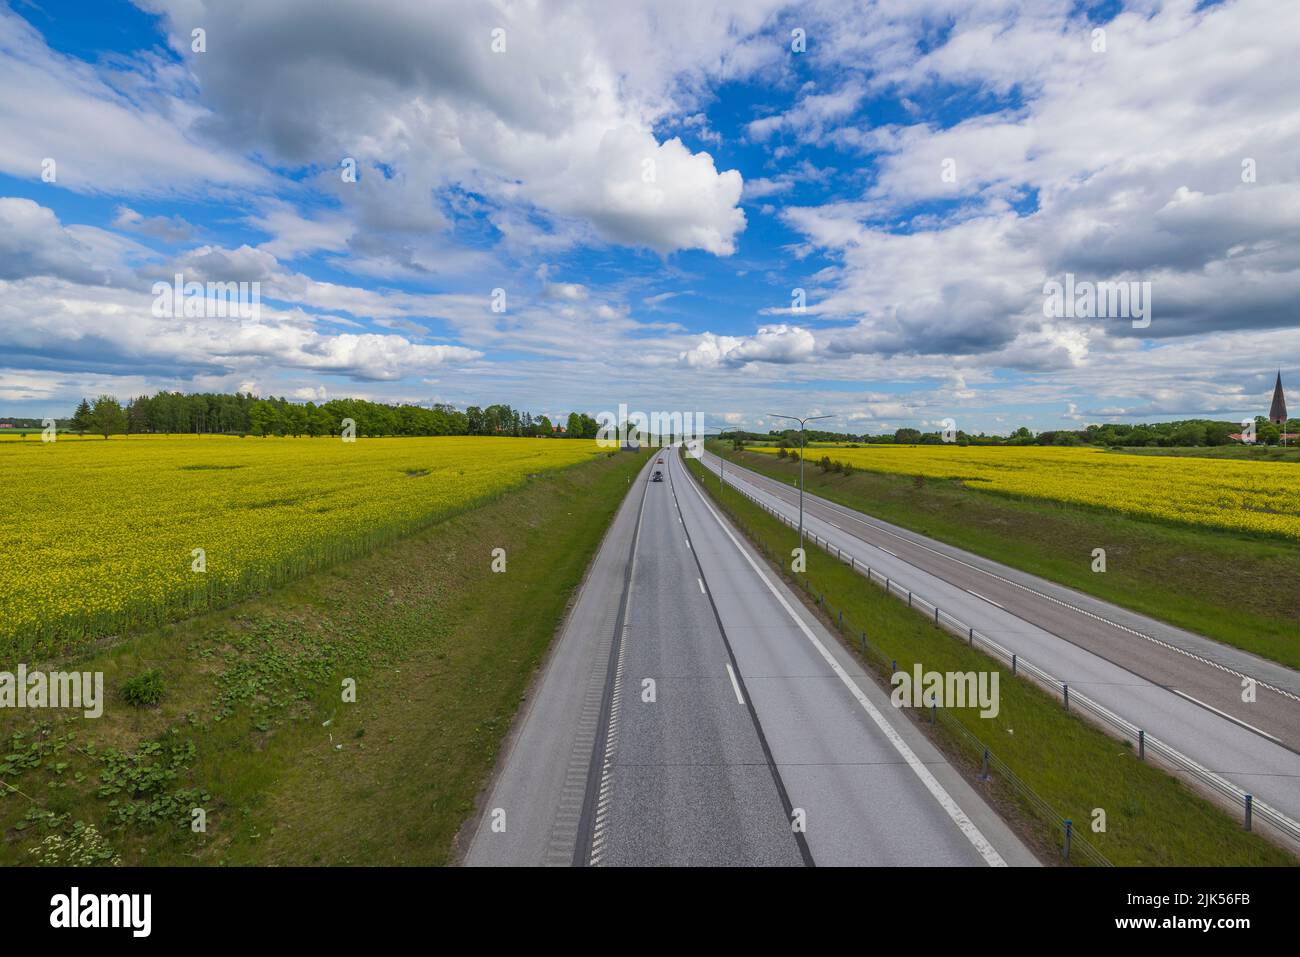 Beautiful top view of highway with several cars. Green side fields and clouds sky background. Sweden. Stock Photo